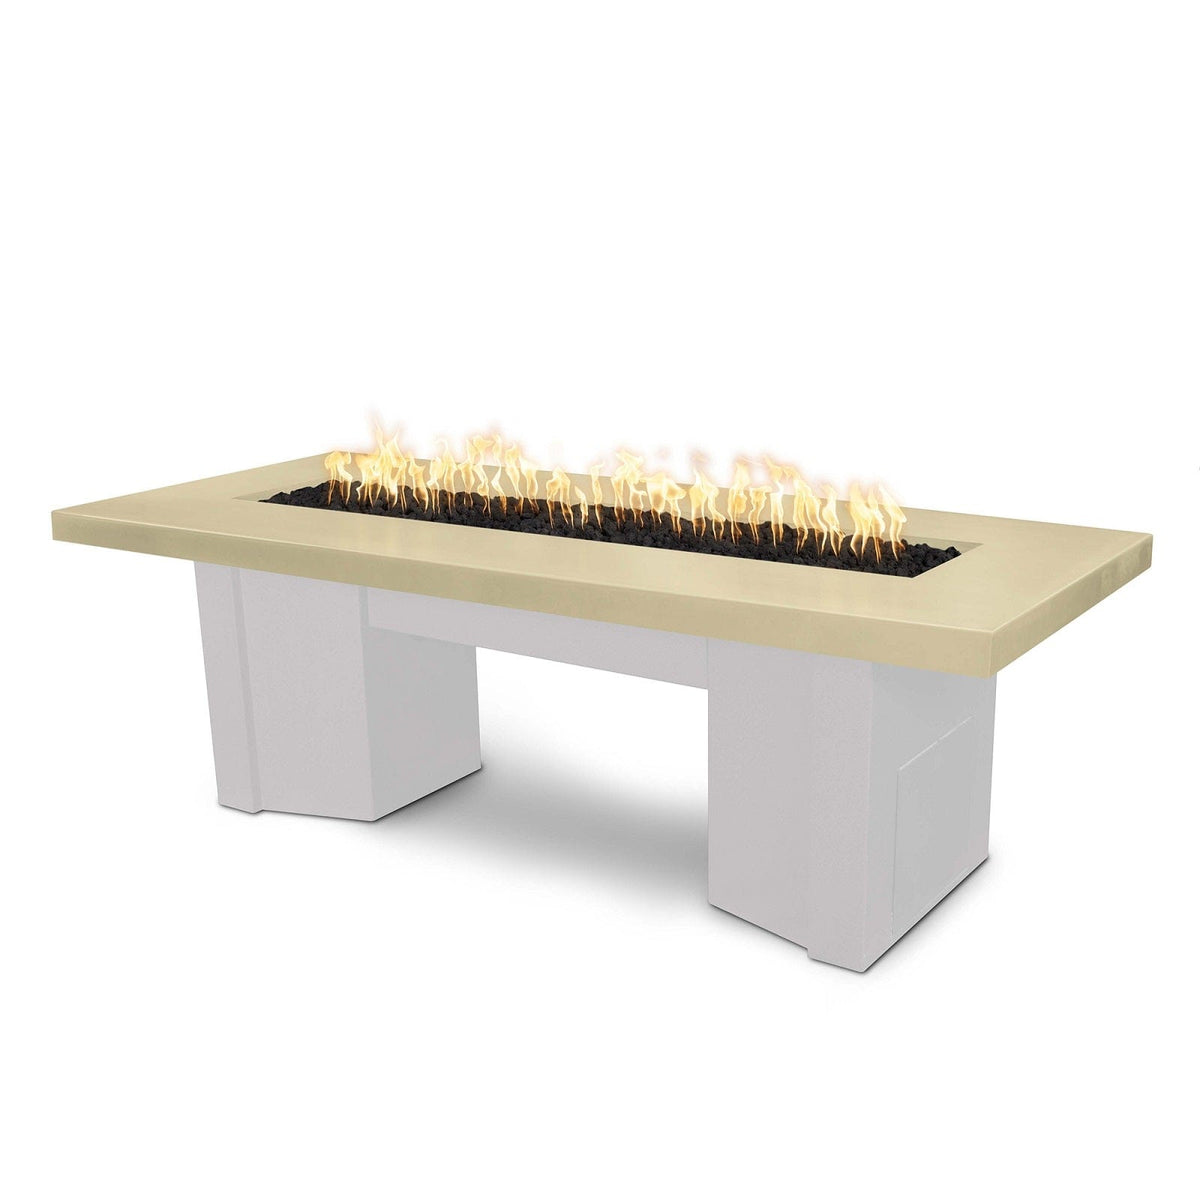 The Outdoor Plus Fire Features Vanilla (-VAN) / White Powder Coated Steel (-WHT) The Outdoor Plus 78&quot; Alameda Fire Table Smooth Concrete in Liquid Propane - Match Lit with Flame Sense System / OPT-ALMGFRC78FSML-LP